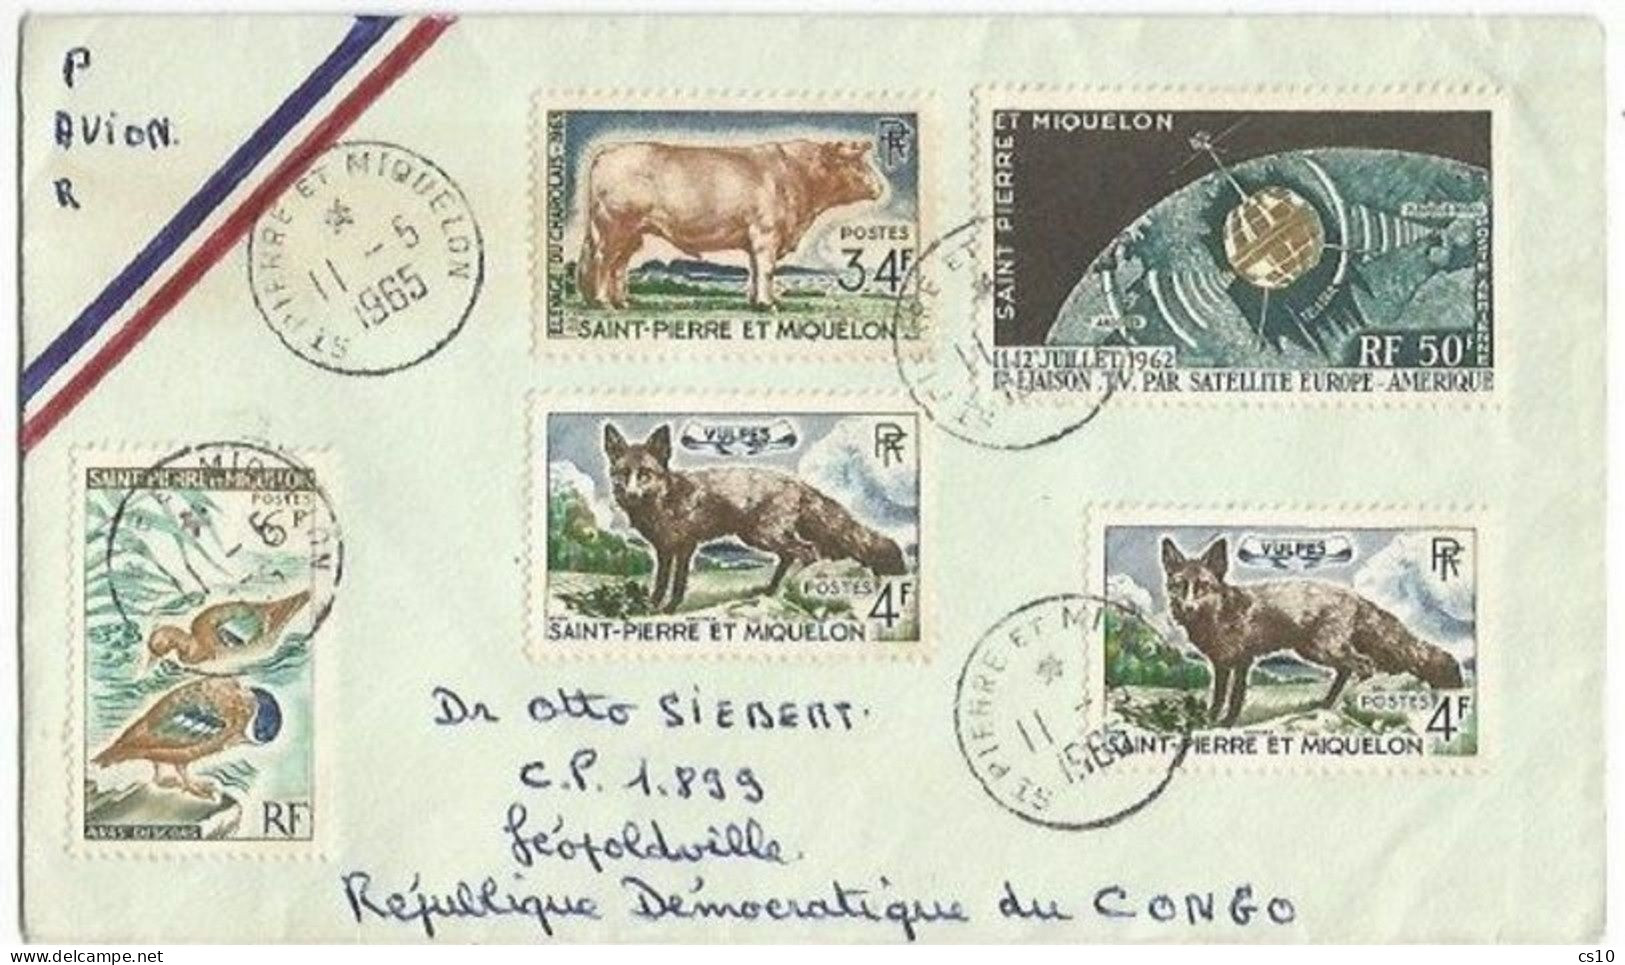 SCARCE! St.Pierre Miquelon AirmailCV 11may1965 With 5 Stamps Rate 98F DIRECTED TO CONGO Not France Or Canada !!!!!! - Collezioni & Lotti